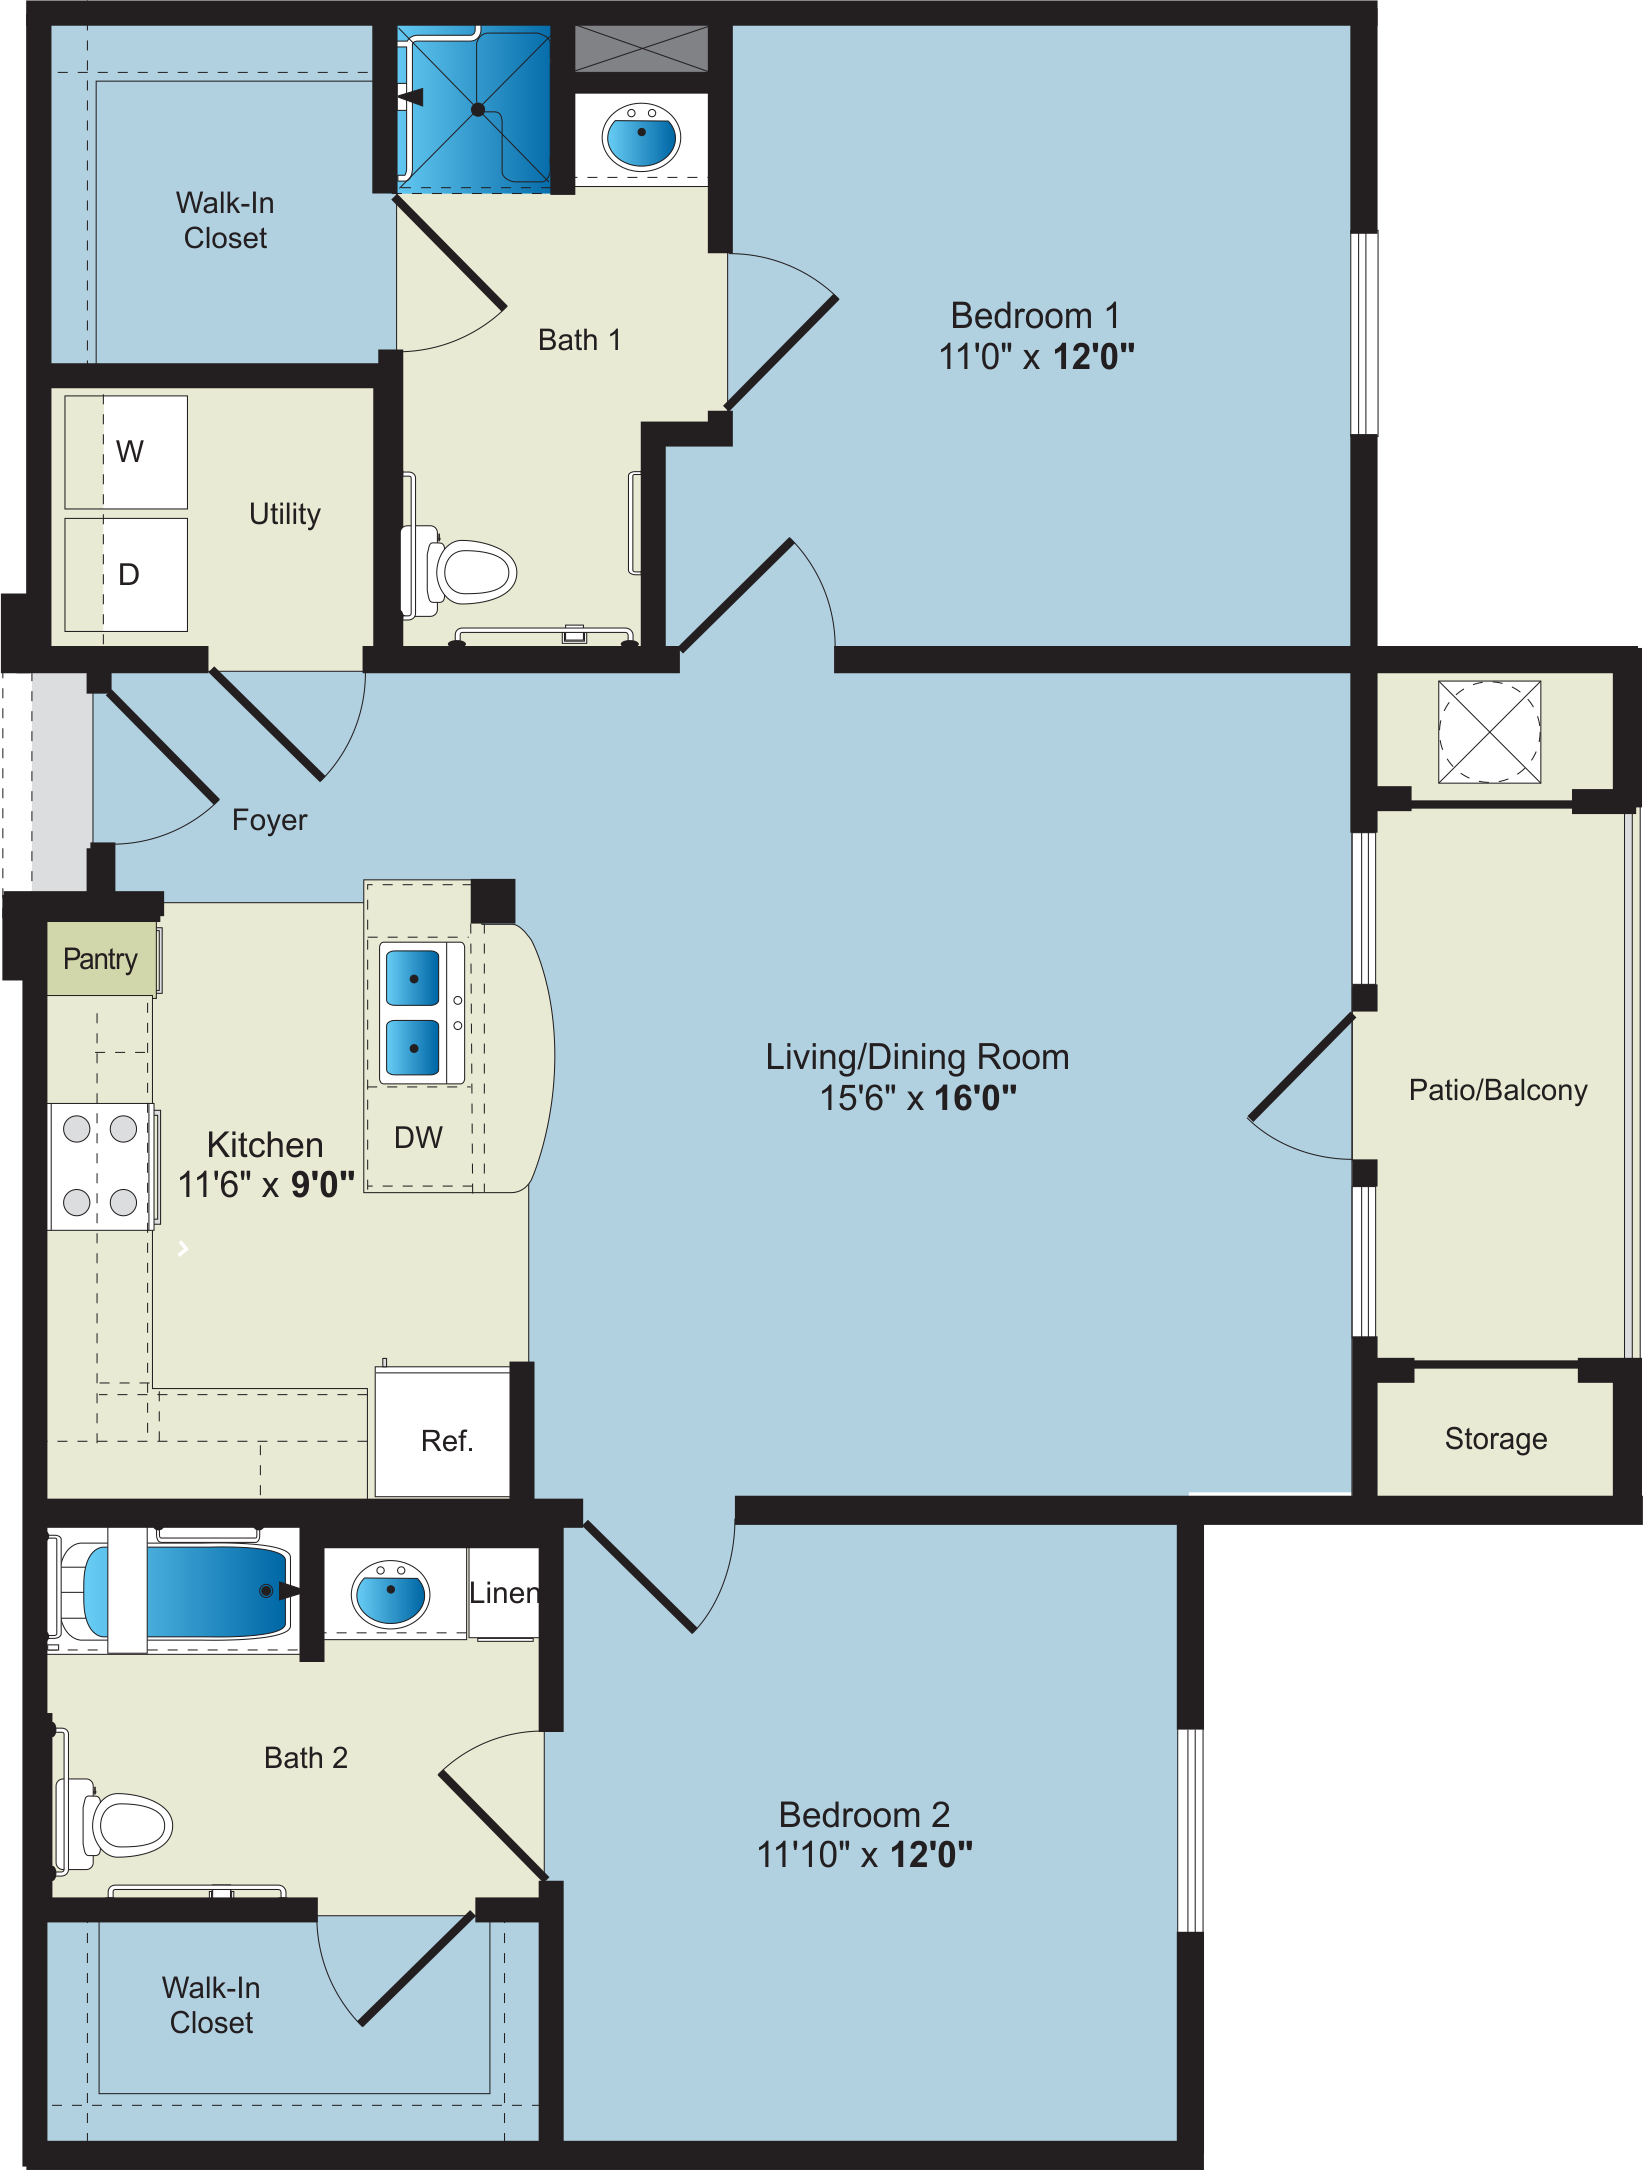 A floor plan for a two bedroom apartment available for Apartment Rentals.